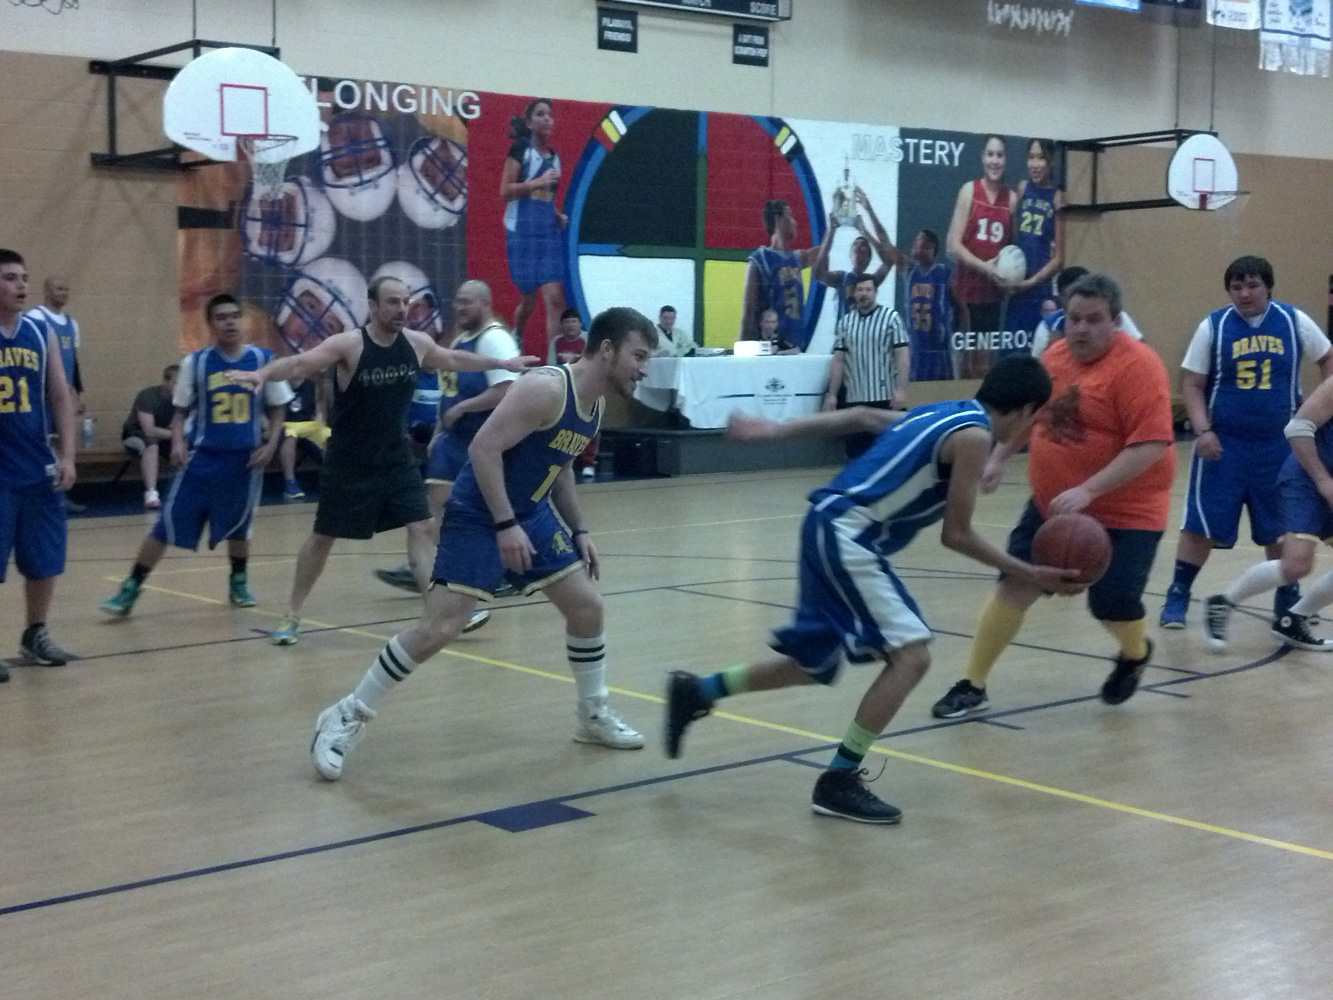 St. Joseph’s eighth grade boys matched up against staff for a basketball game.